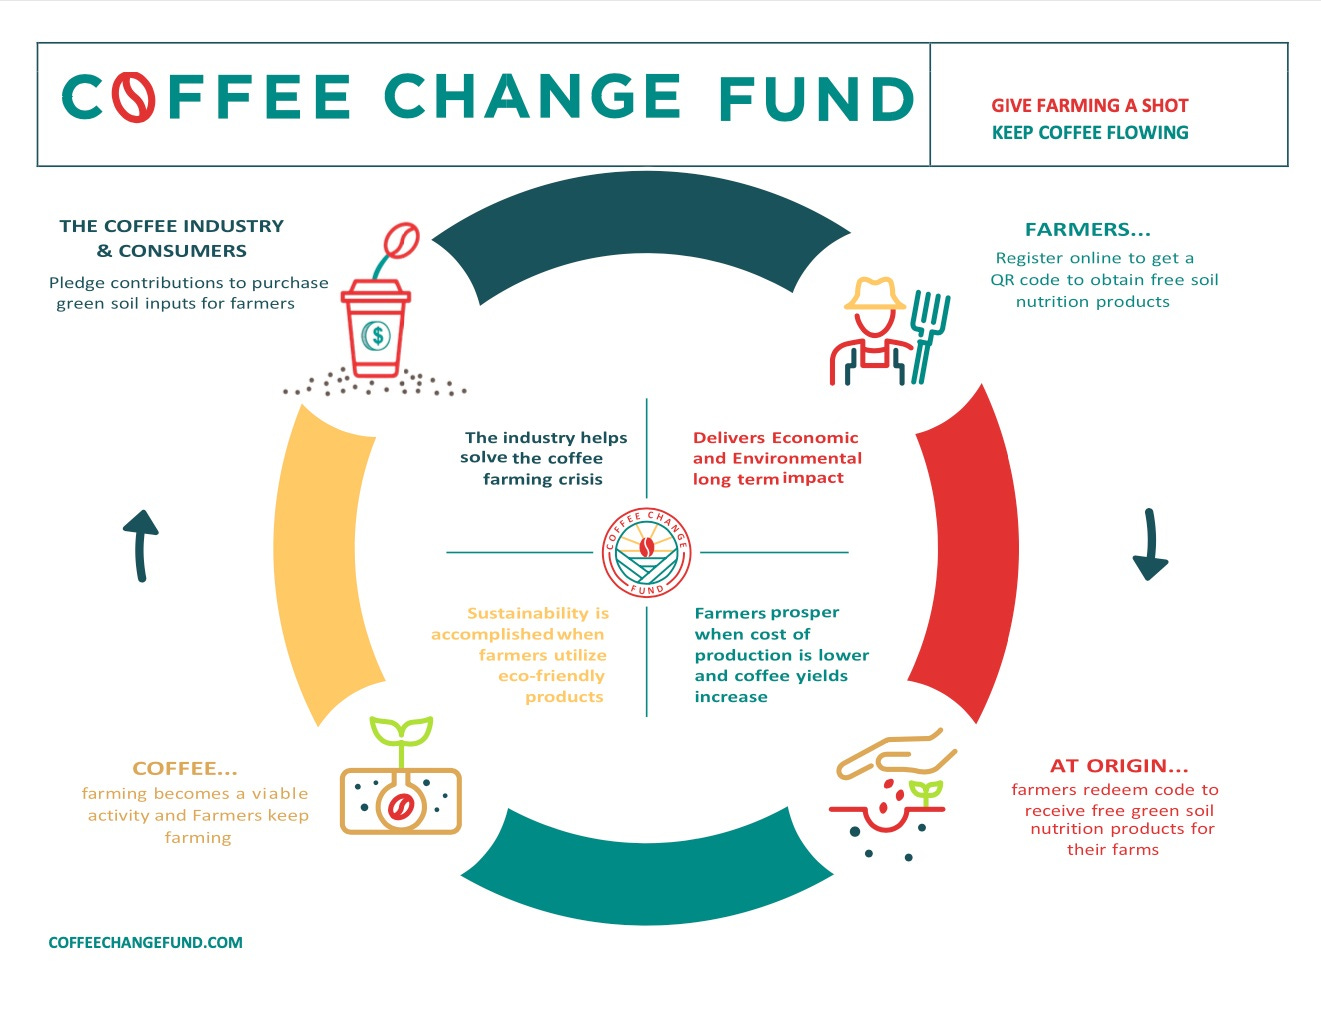 An infographic detailing how the Coffee Change Fund might work